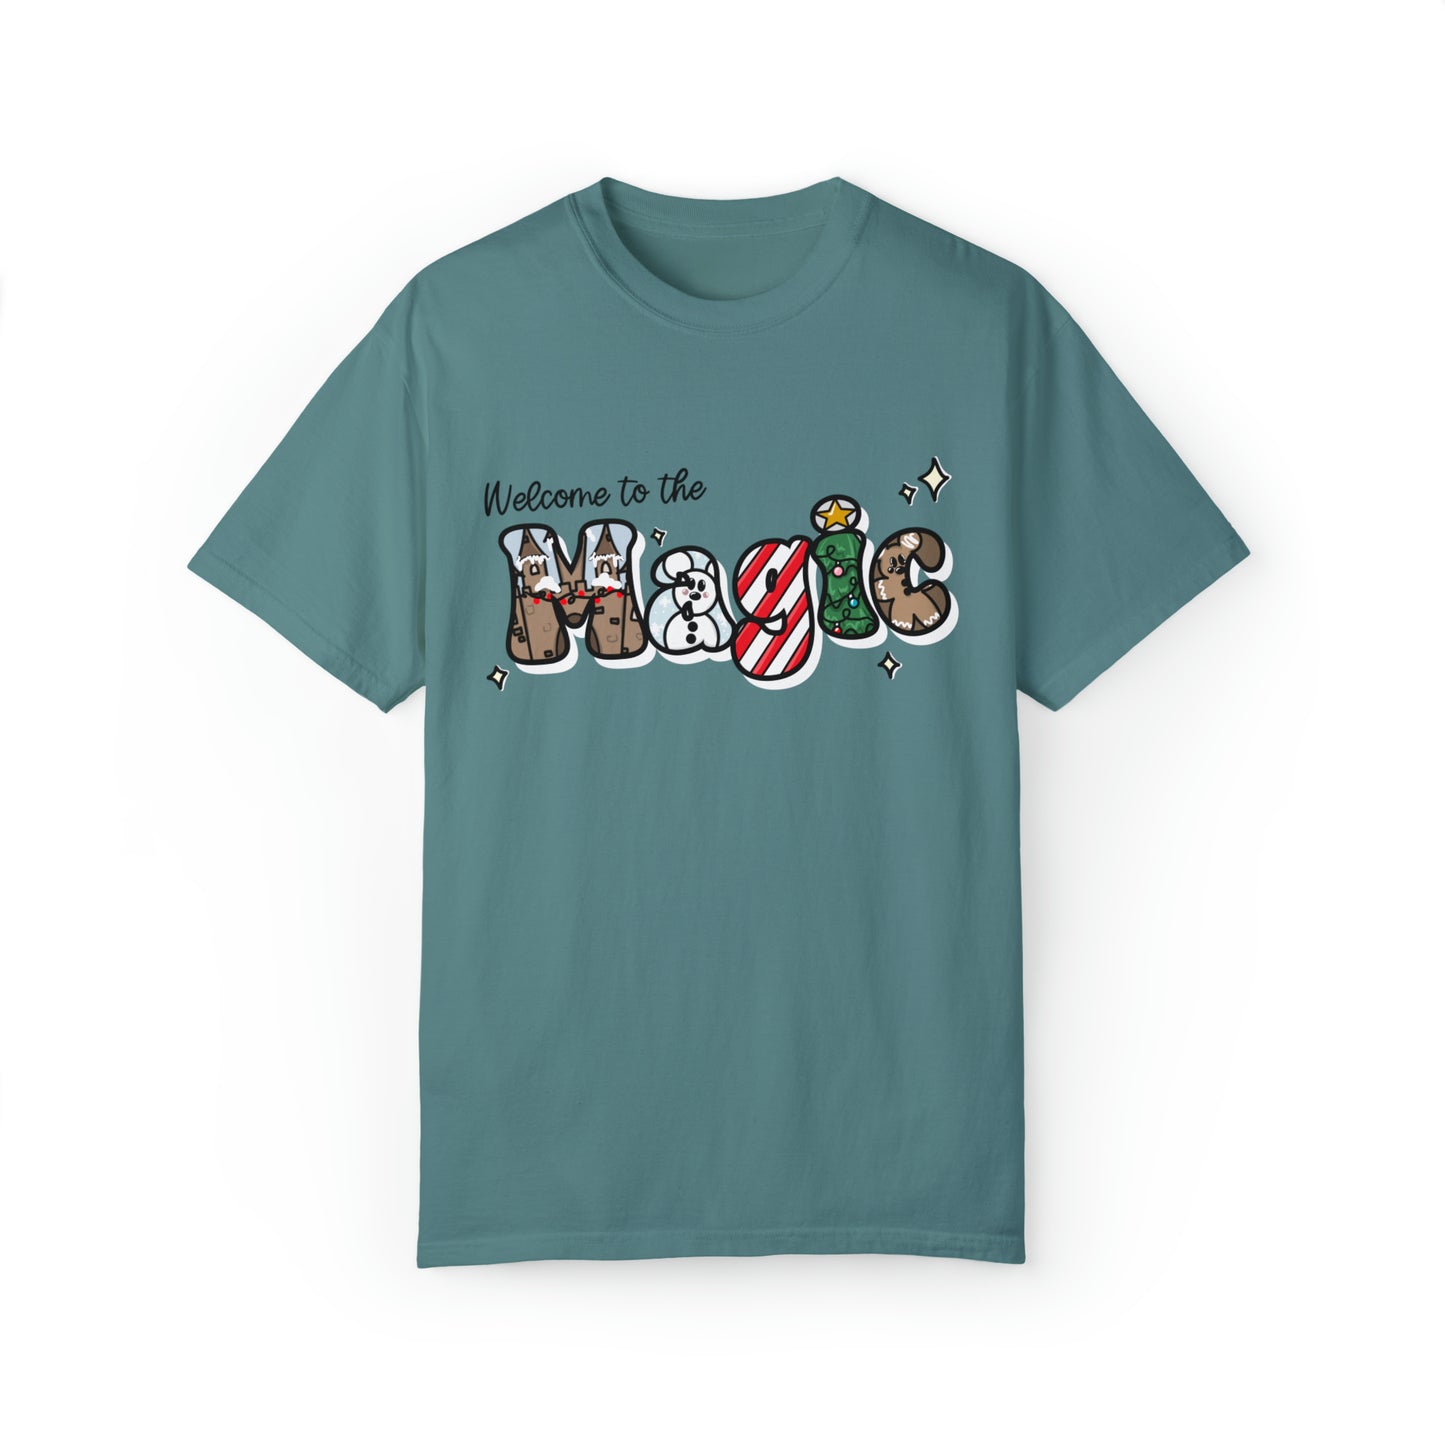 Adult Welcome to the ^Christmas Magic Tee - Comfort Colors